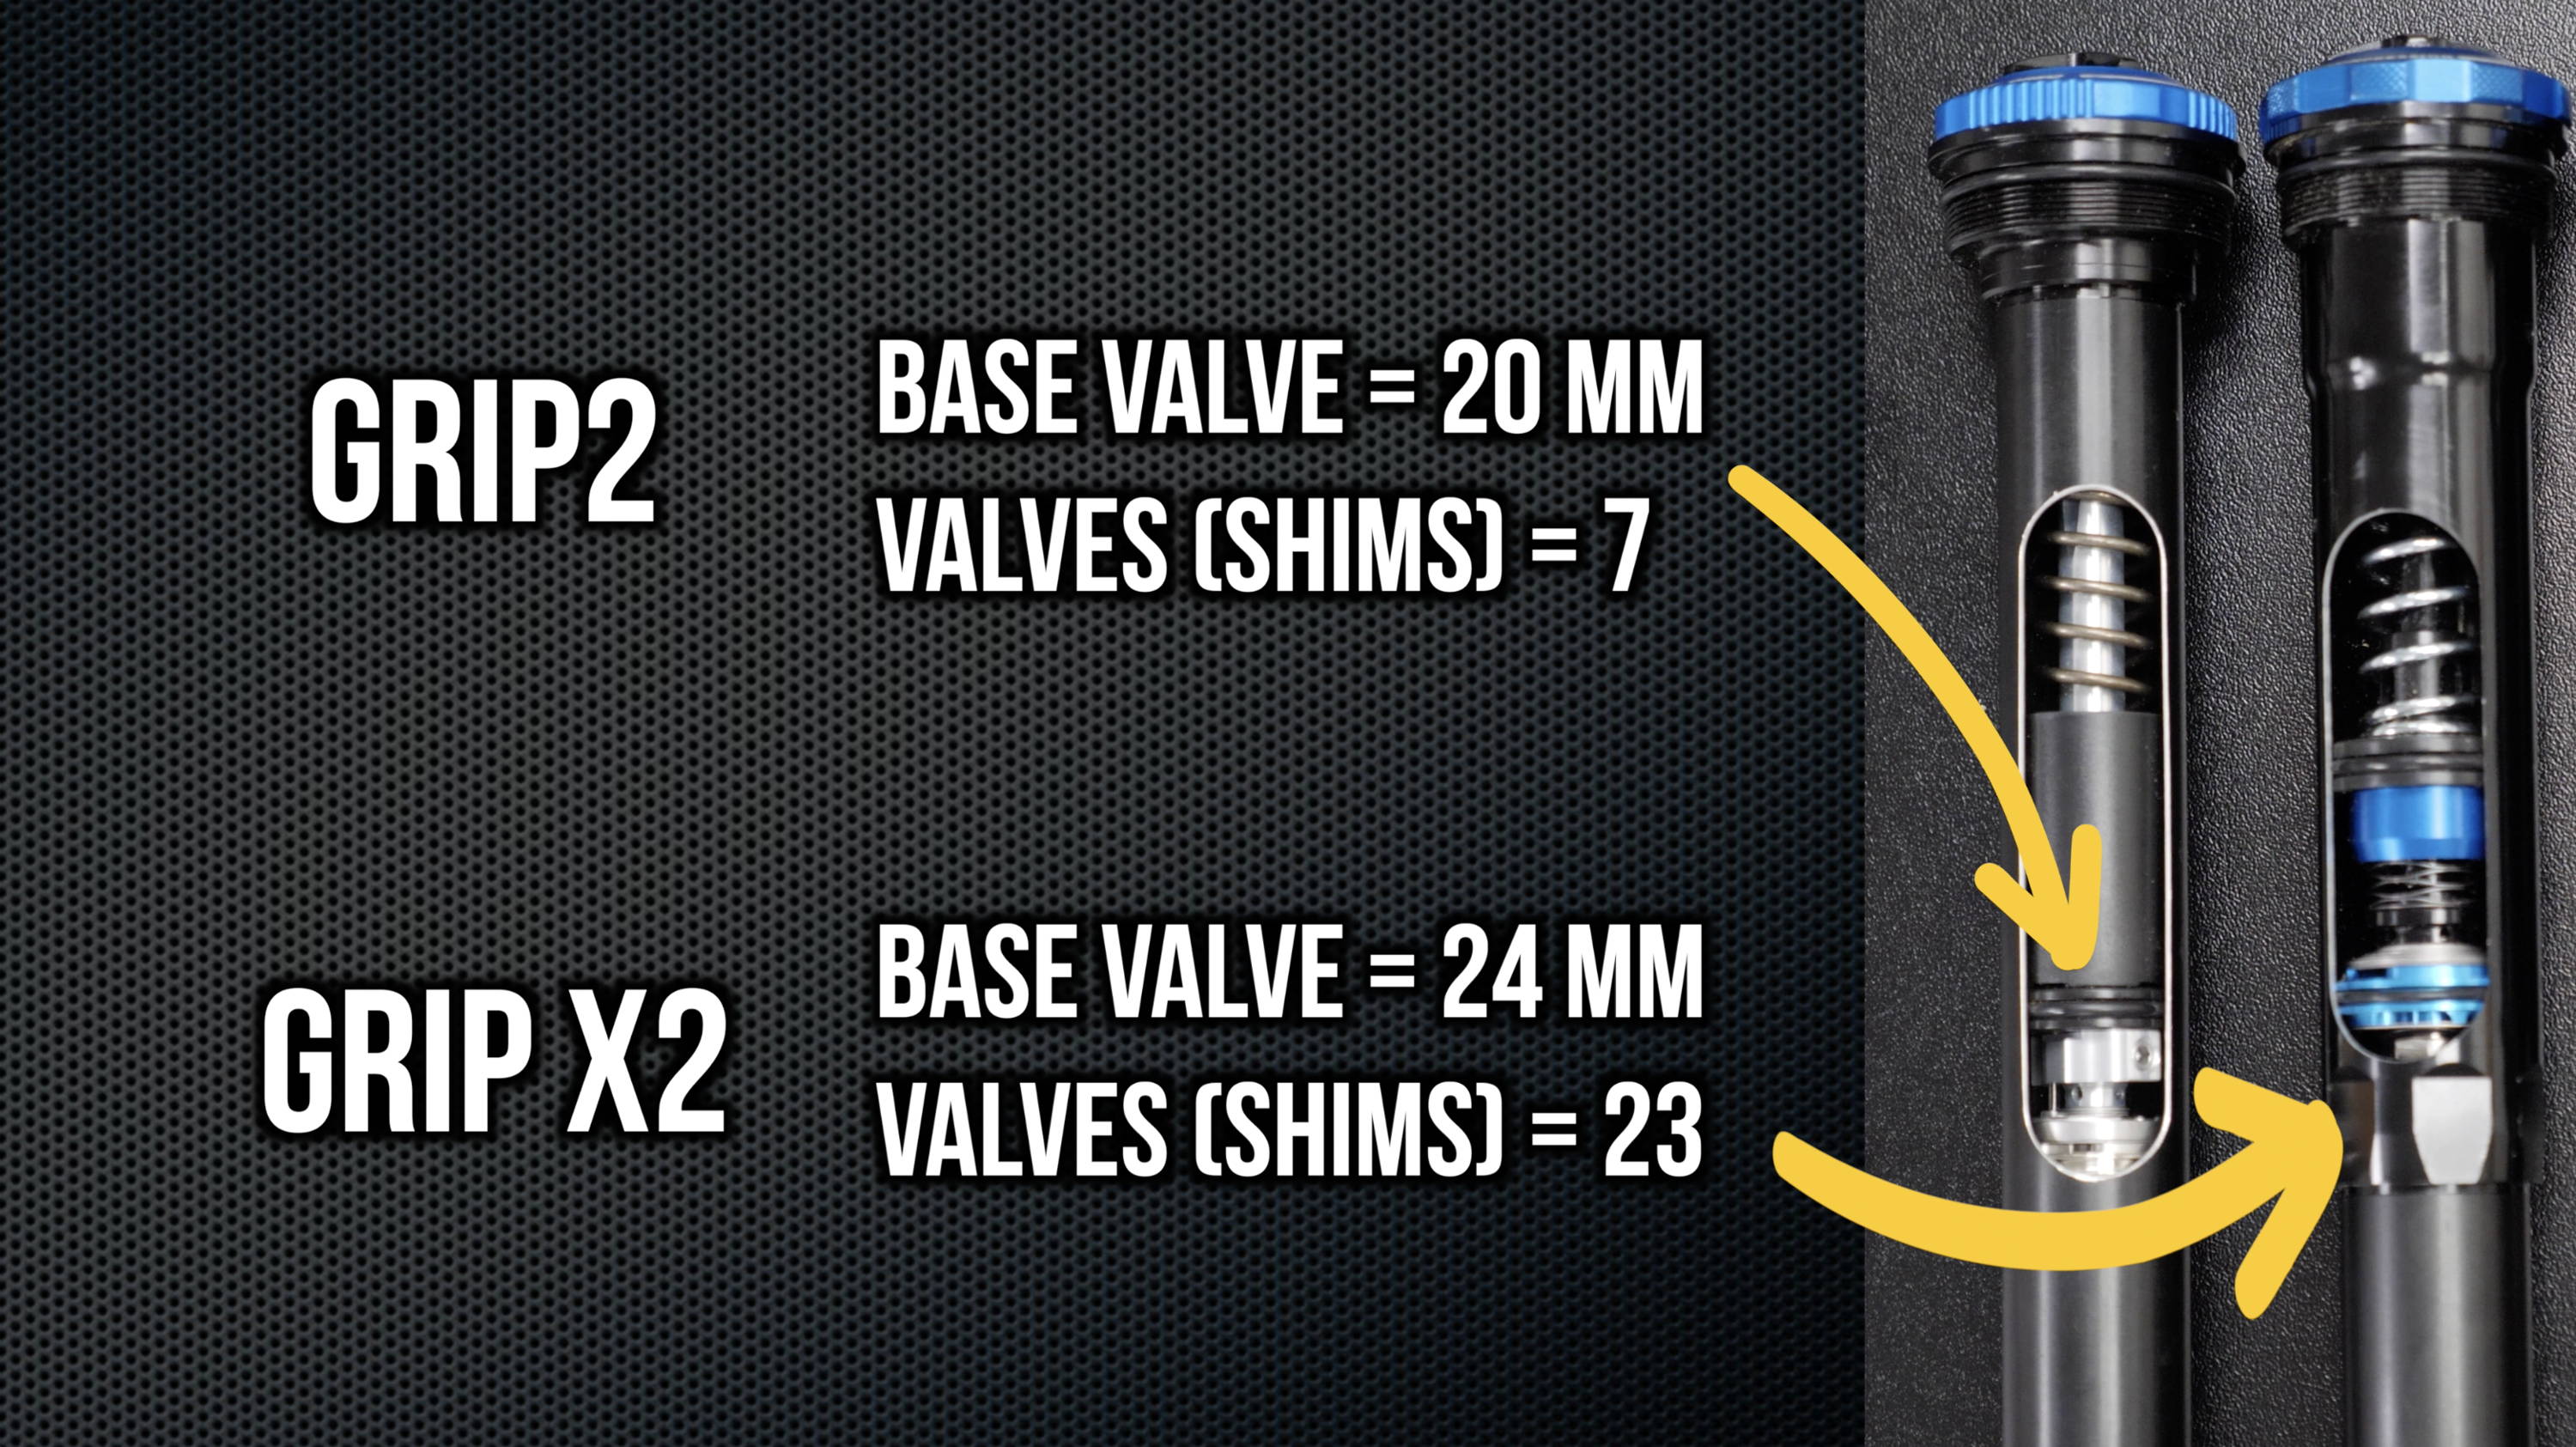 infographic showing the base valve size and shim count for fox grip2 and grip x2 dampers